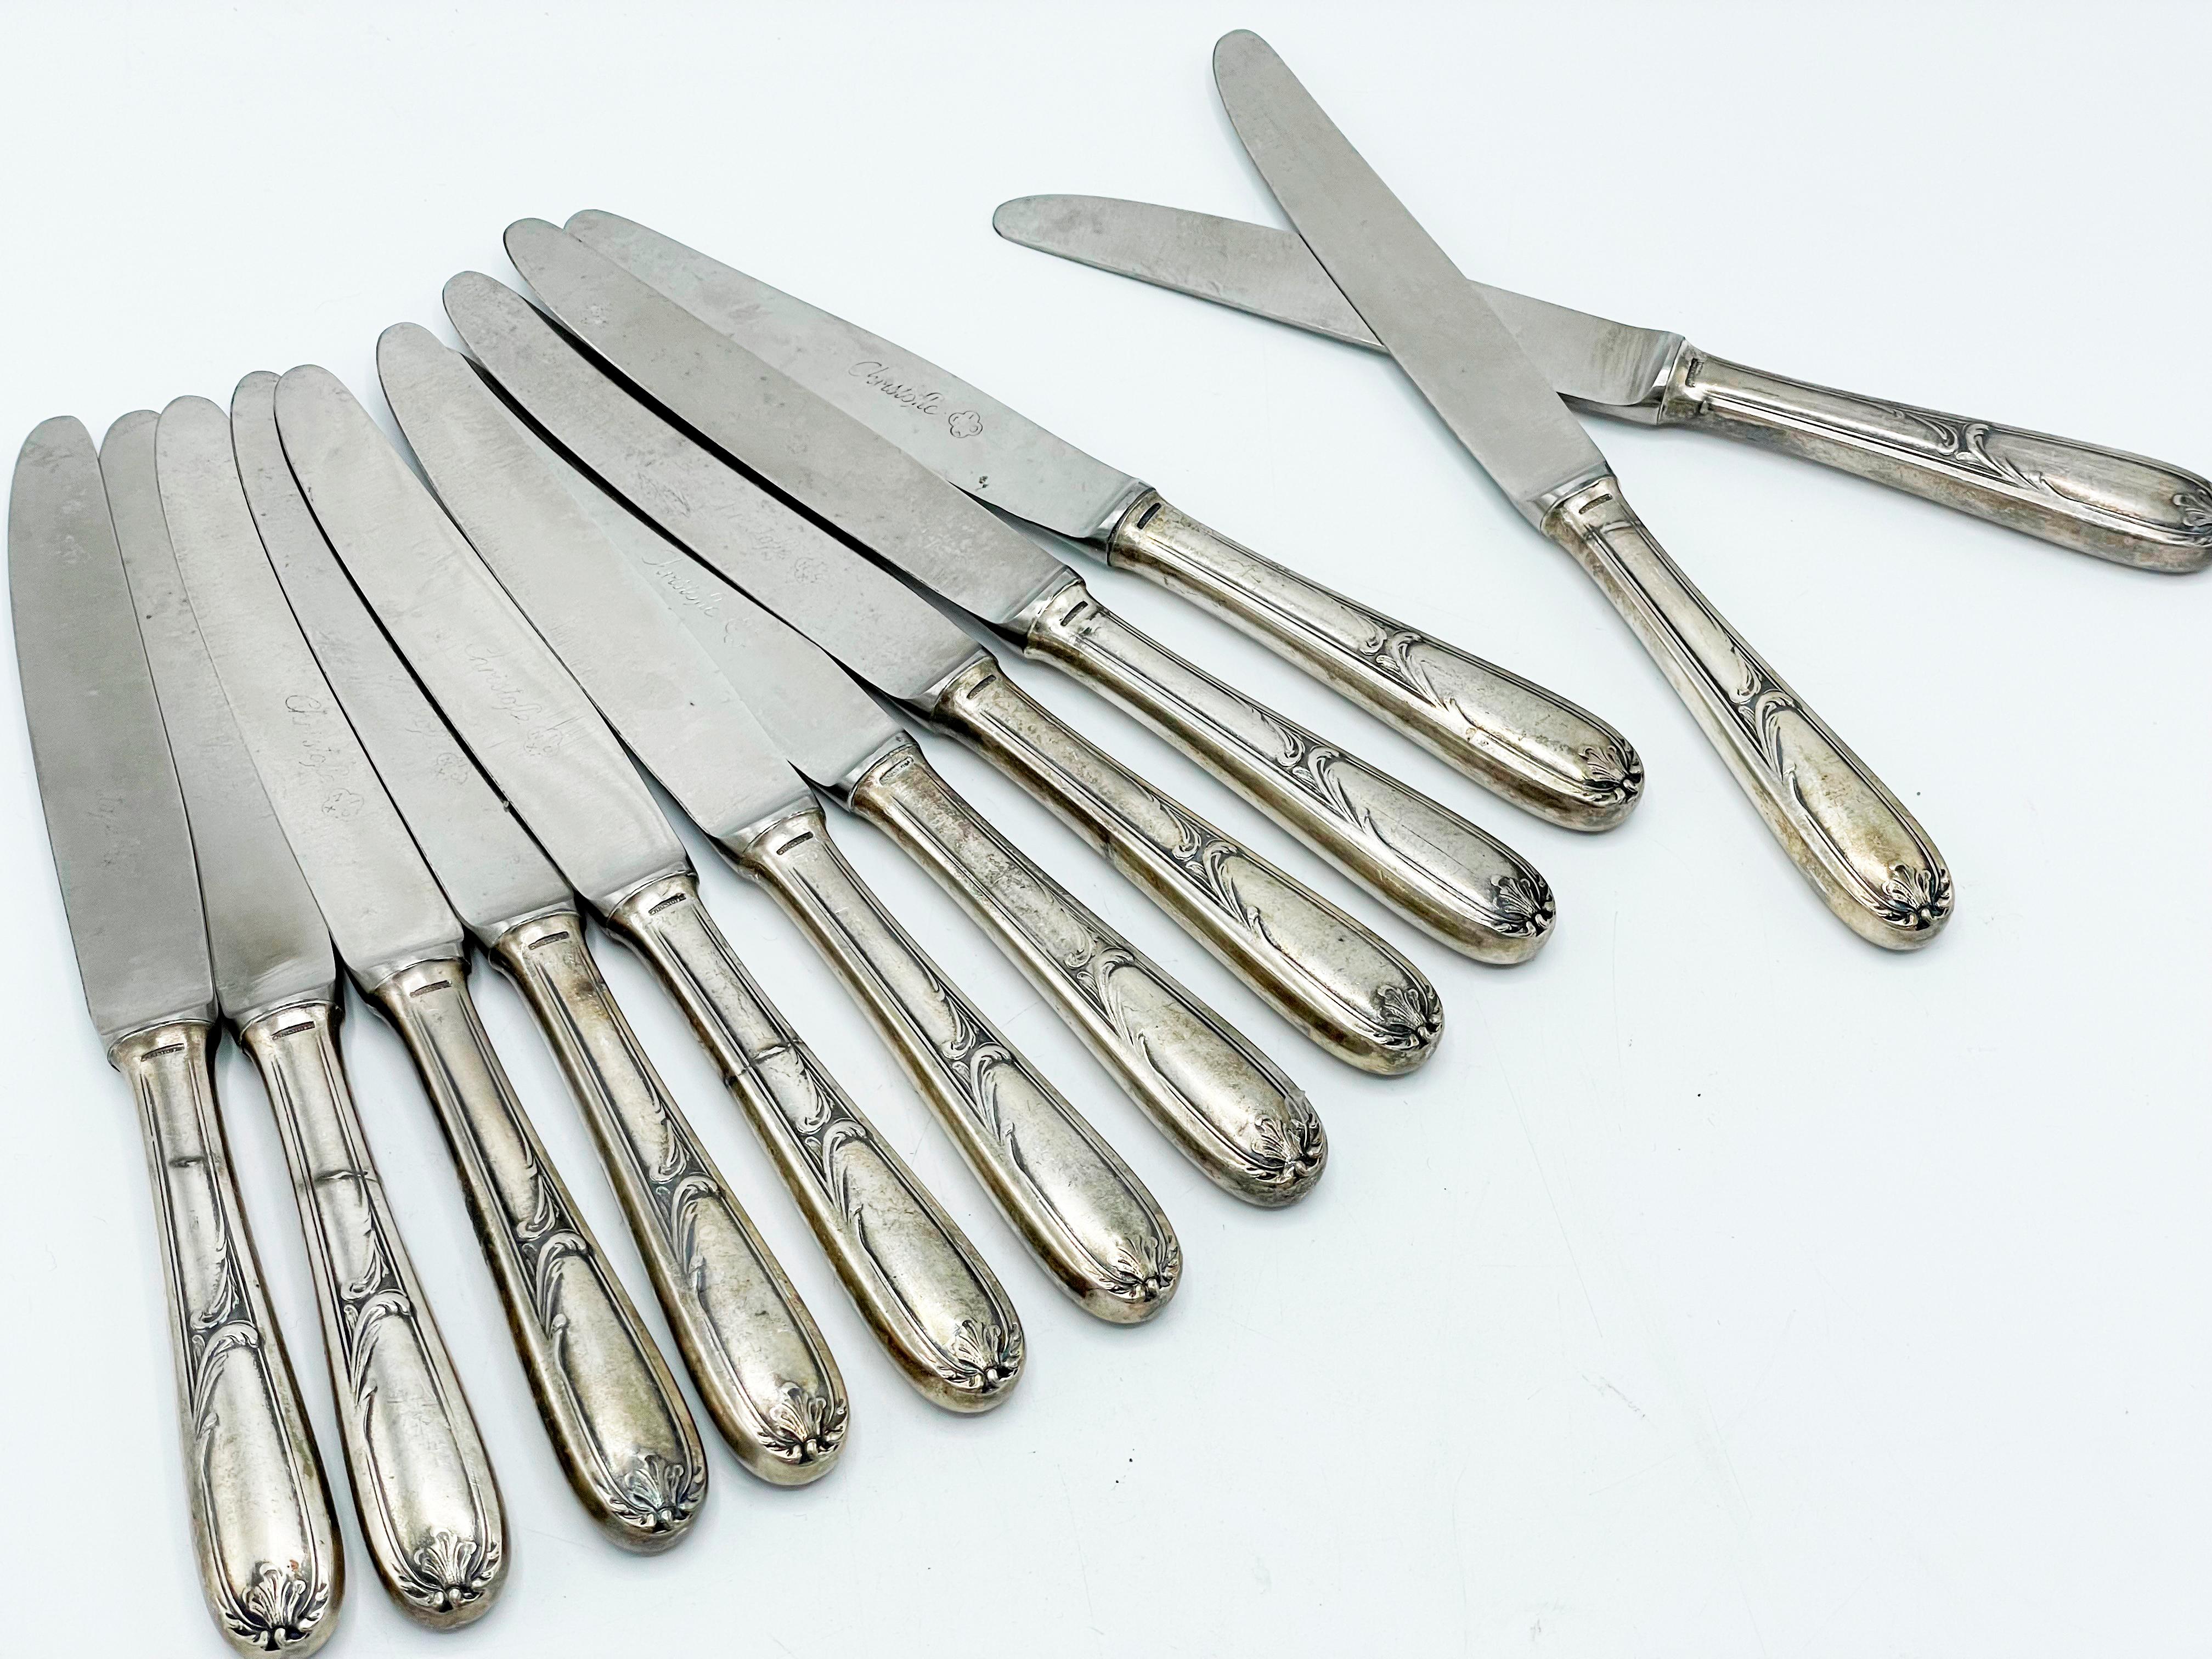 Christofle Made in Argentina, Flatware art nouveau in Silverplated 3